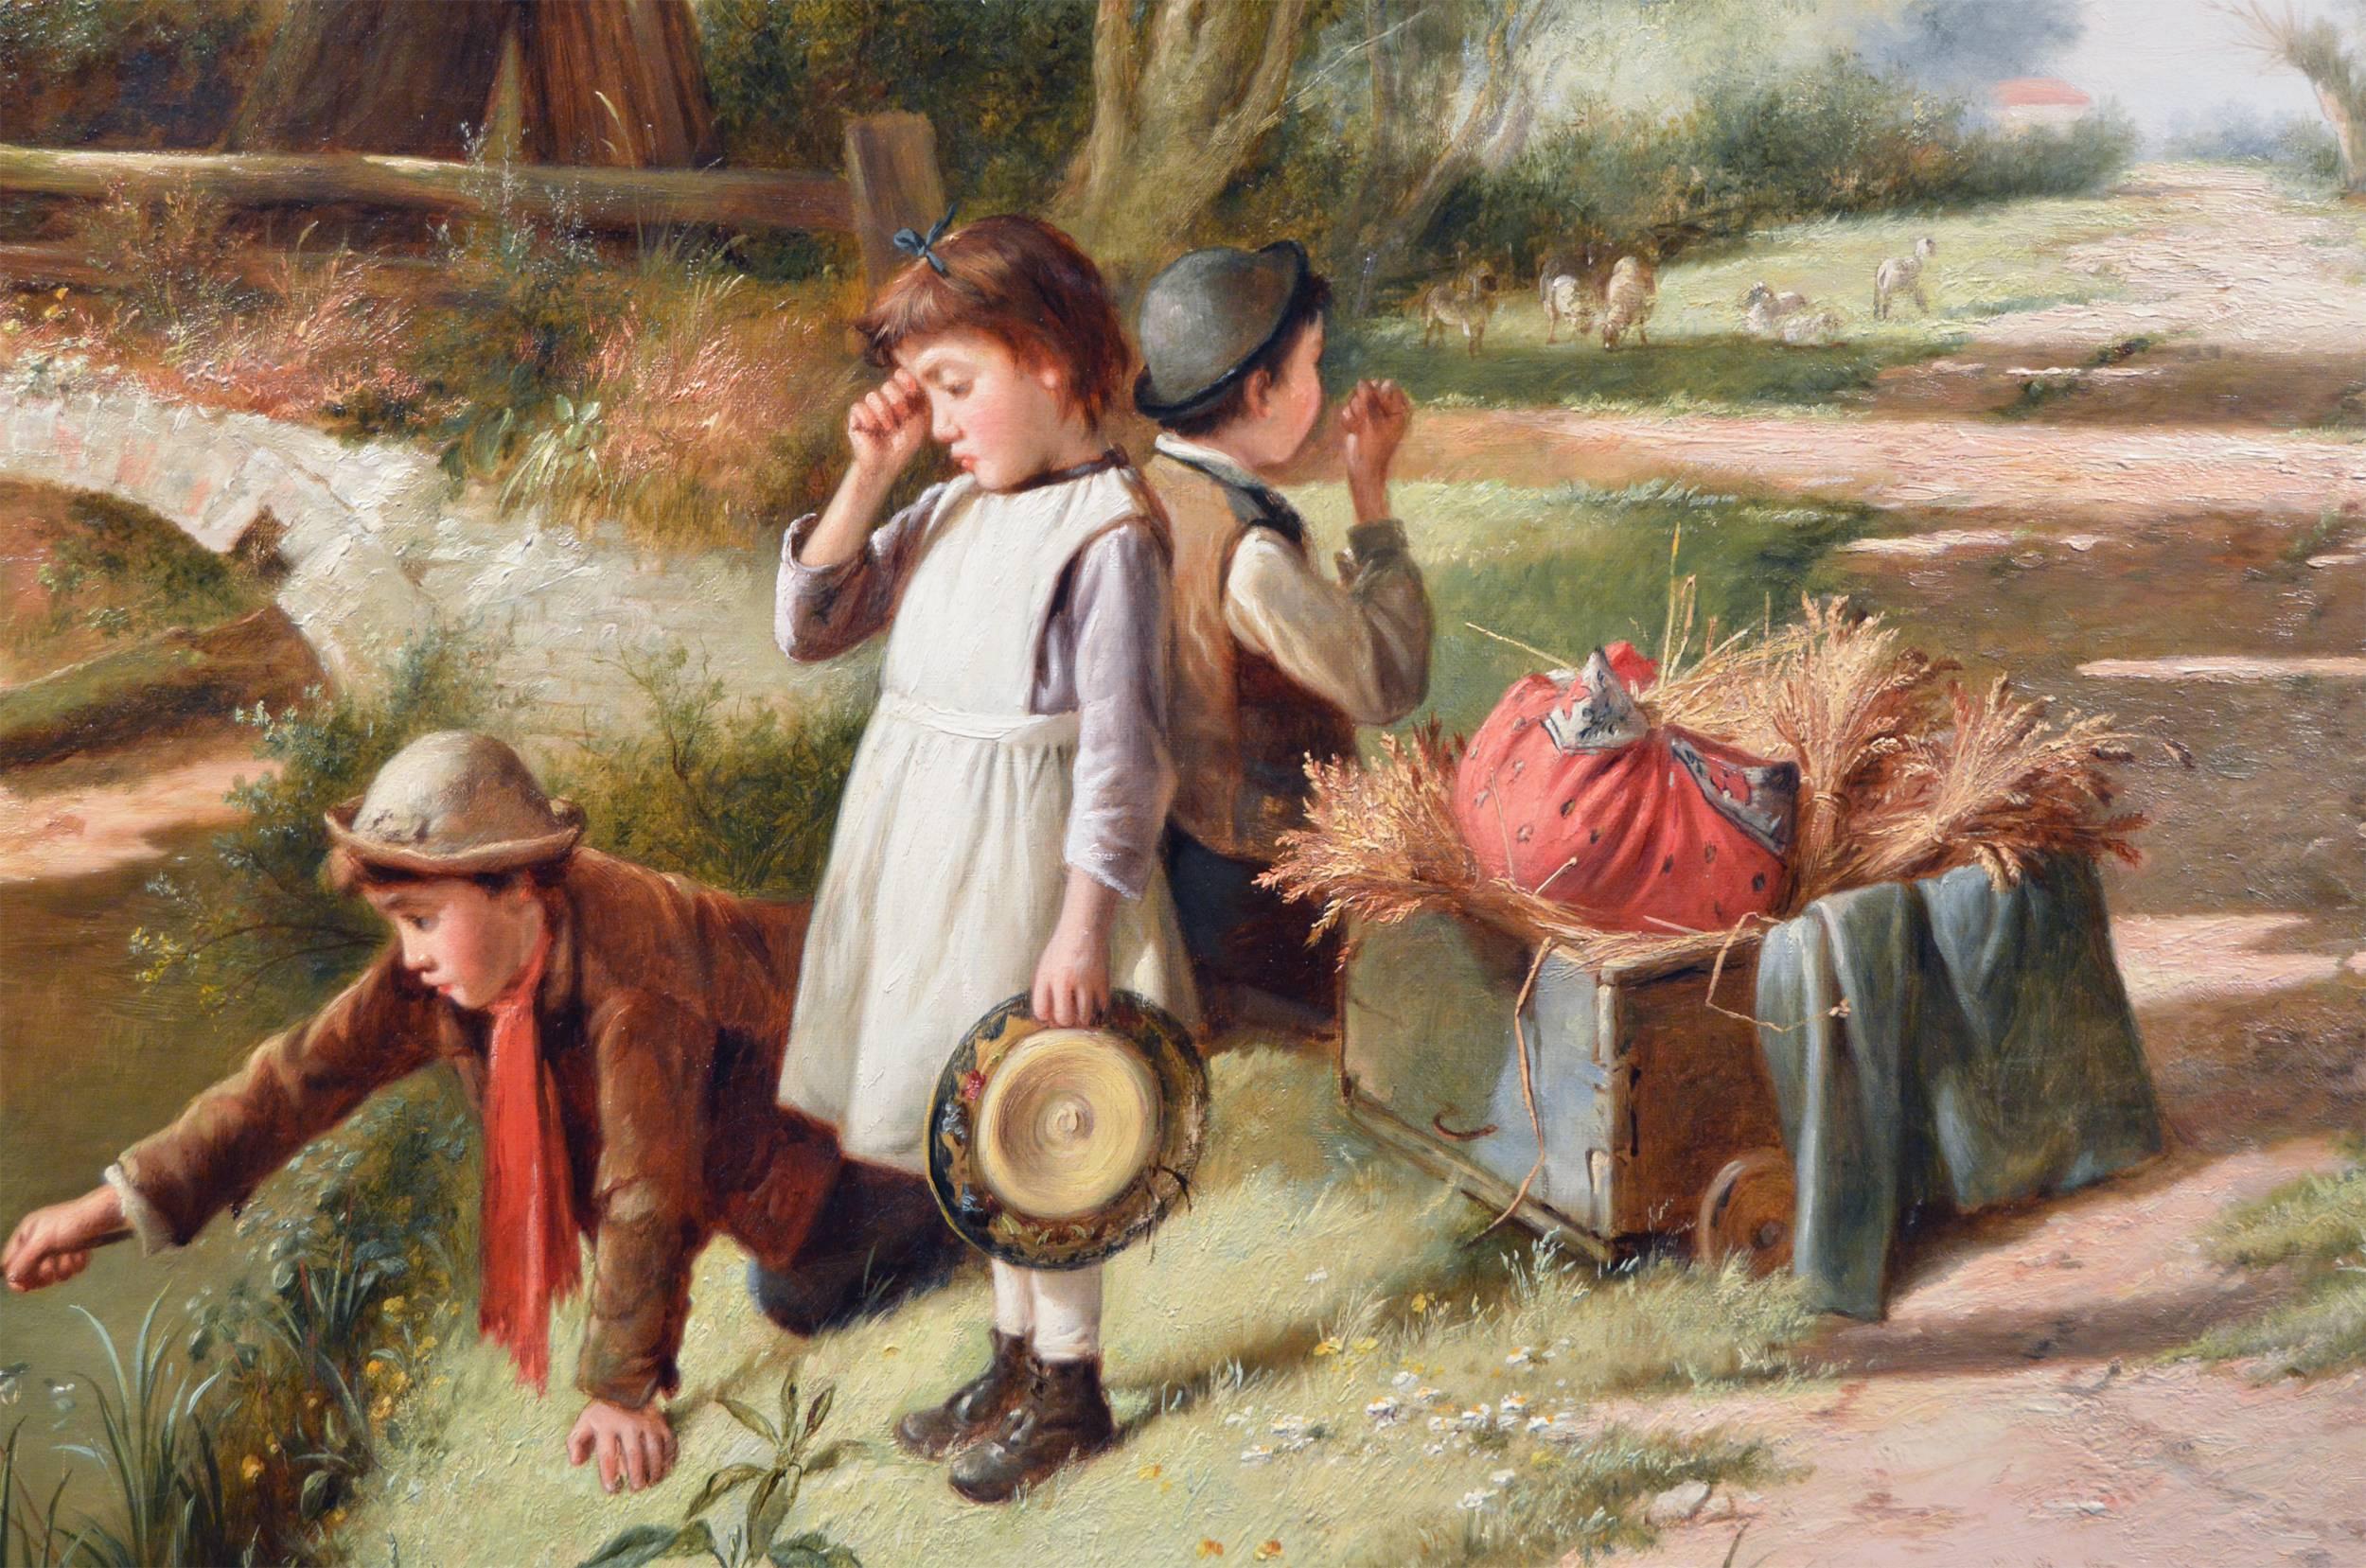 The Rescue, oil on canvas - Victorian Painting by Charles Hunt Jnr